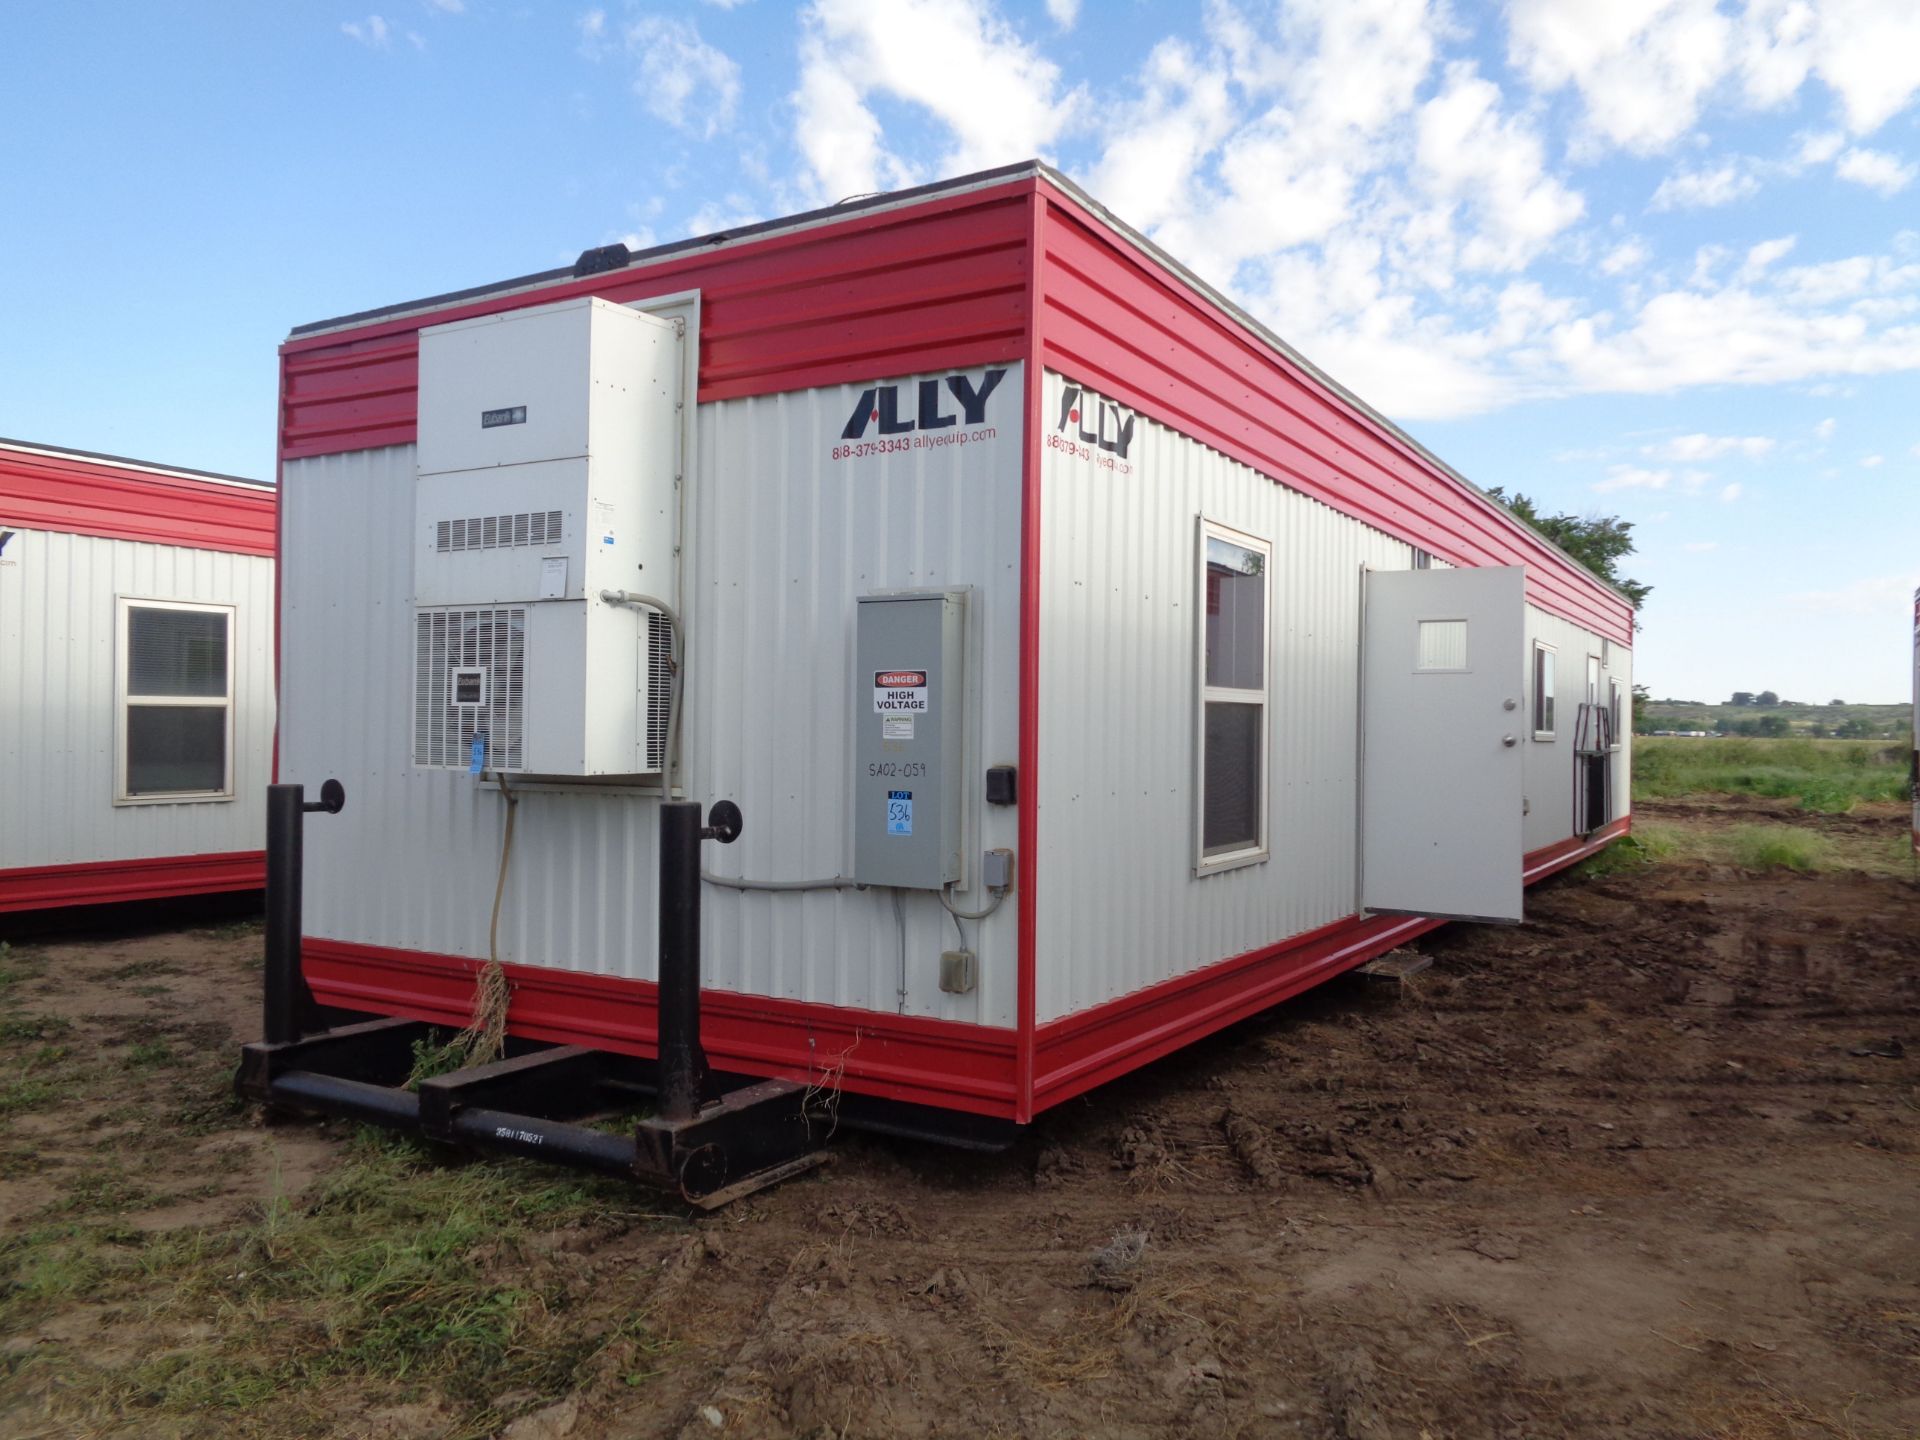 ATCO MODEL 13 X 58 TWO BEDROOM WILL SITE ACCOMMODATION UNIT; BUILT 2011, S/N 358117052, (2)